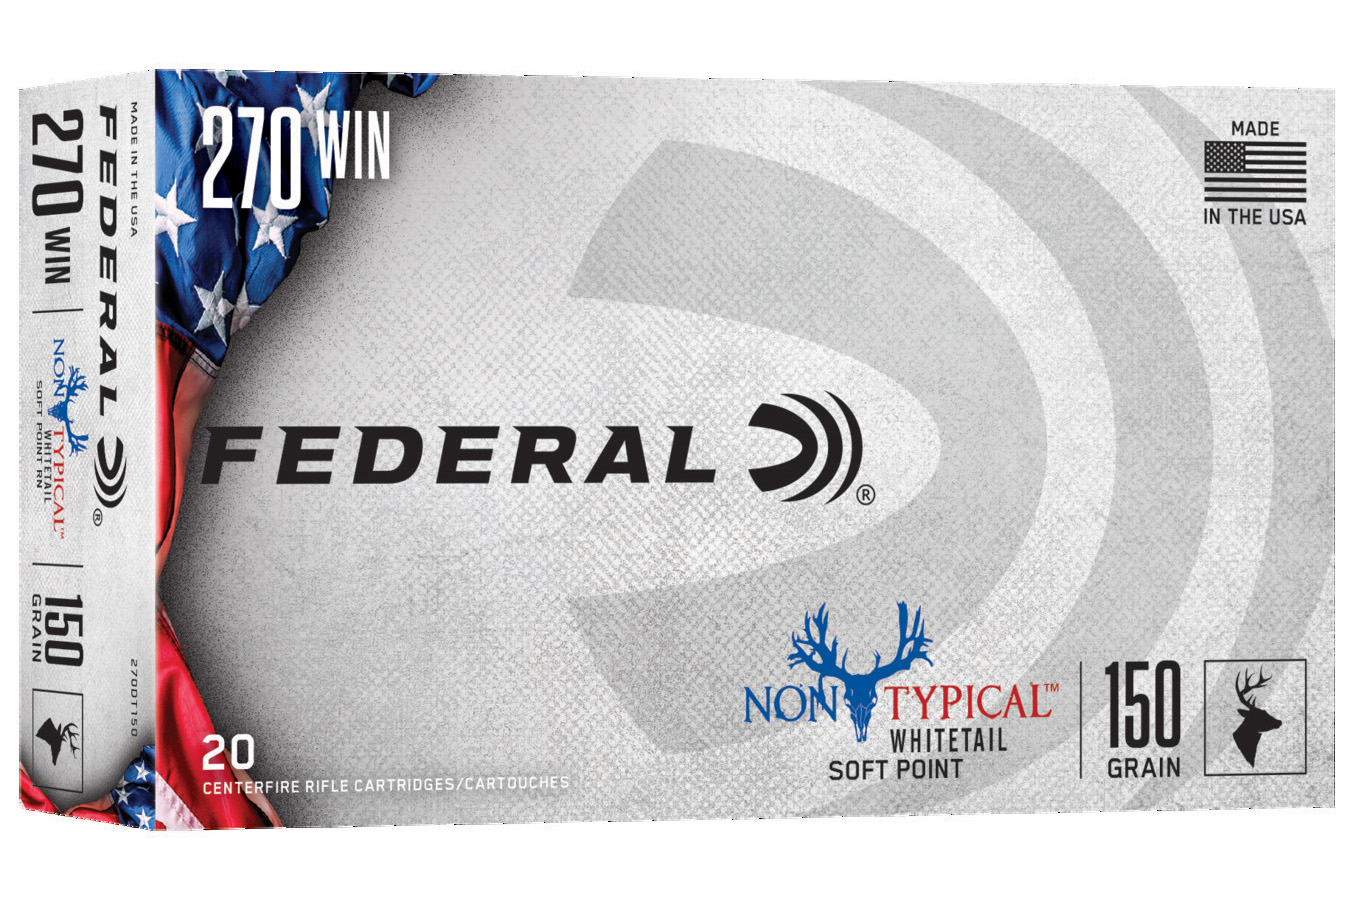 FEDERAL AMMUNITION 270 WIN 150 GR NON TYPICAL SOFT POINT